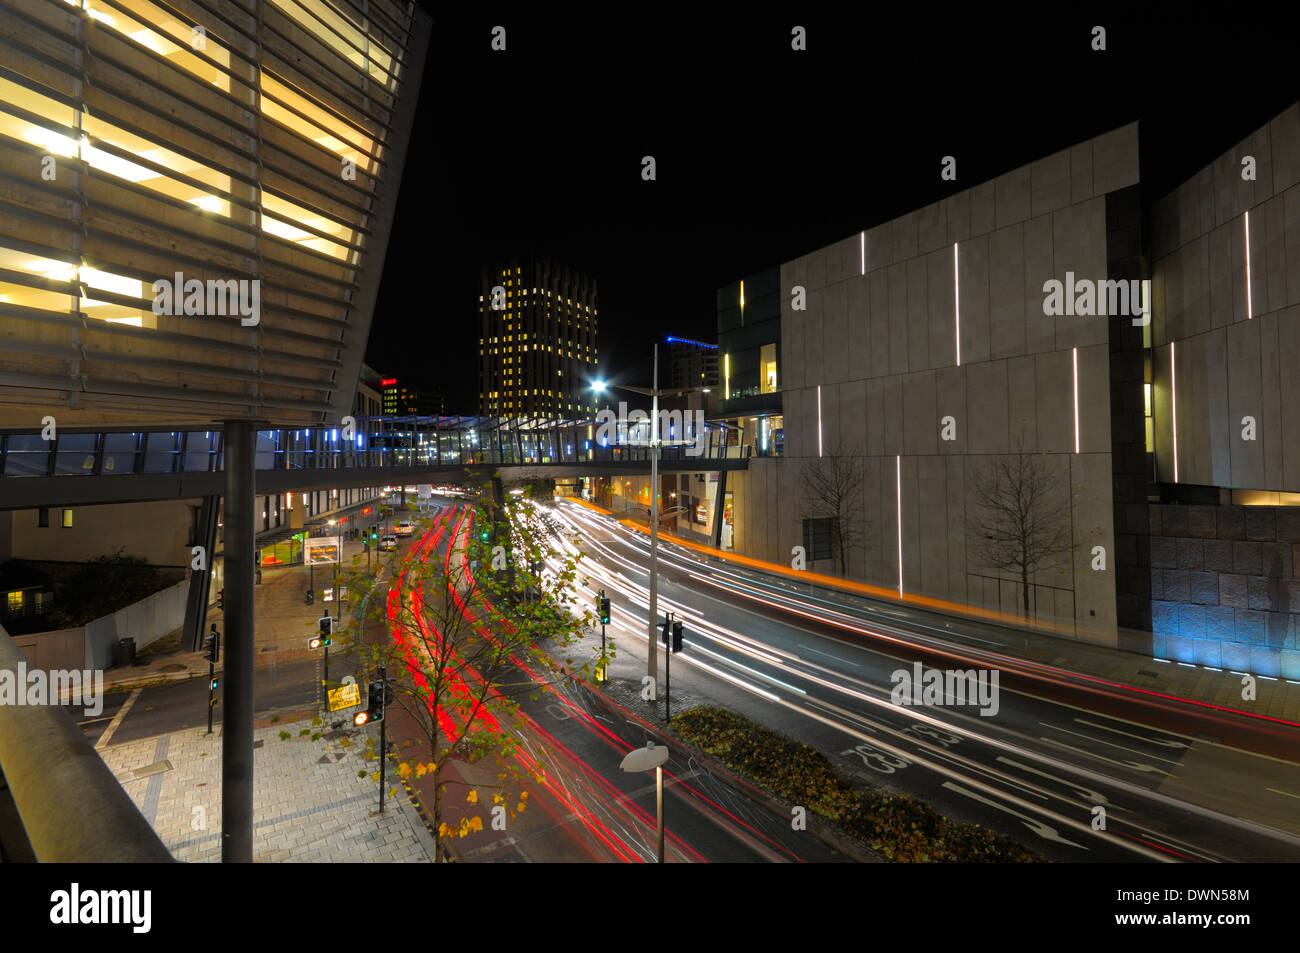 Light trails made by traffic passing through the built up area of the Cabot circus development in the city of Bristol at night. Stock Photo